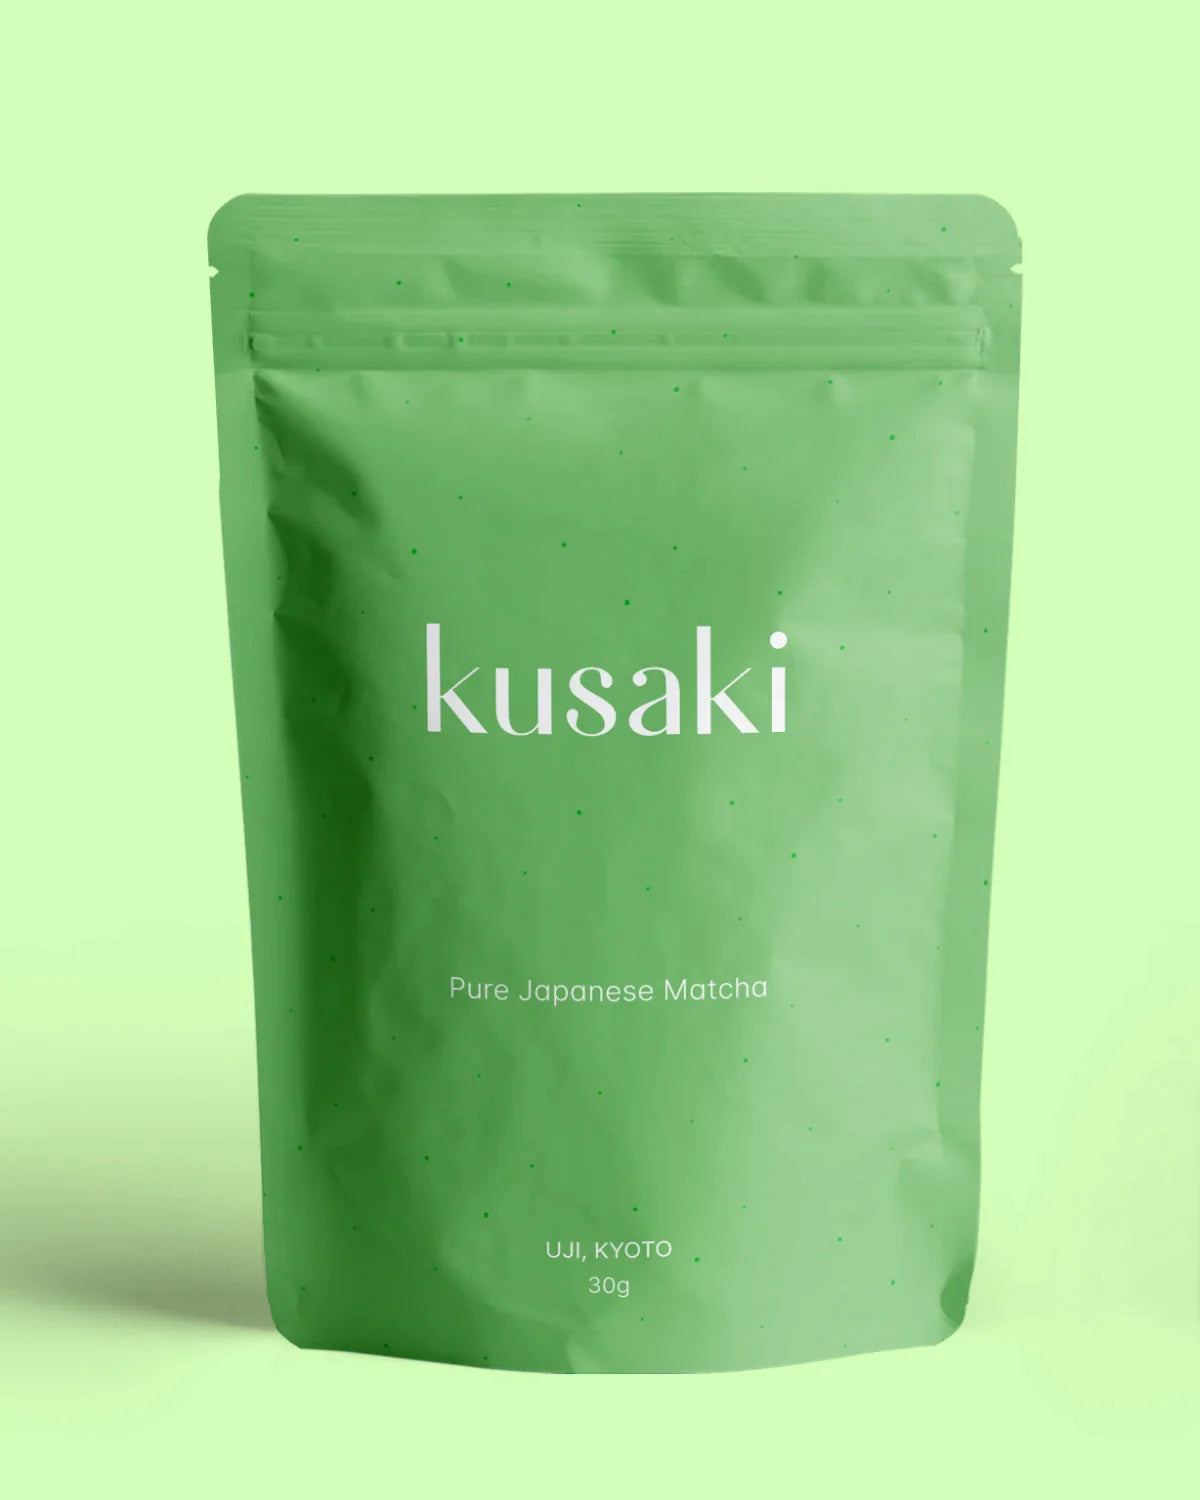 Kusaki Japanese ceremonial matcha green tea pouch hovering over green background